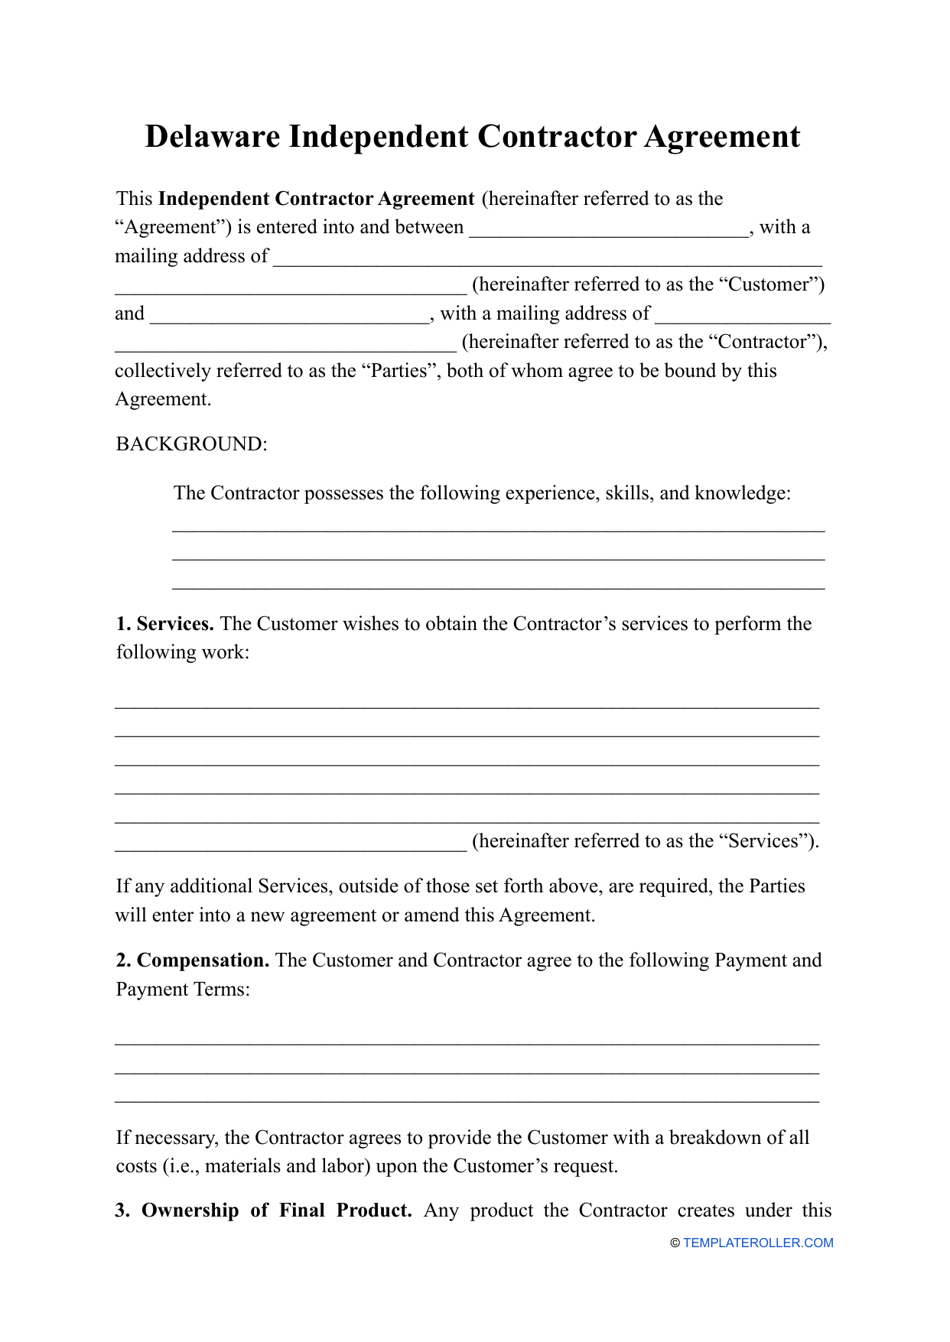 Independent Contractor Agreement Template - Delaware, Page 1